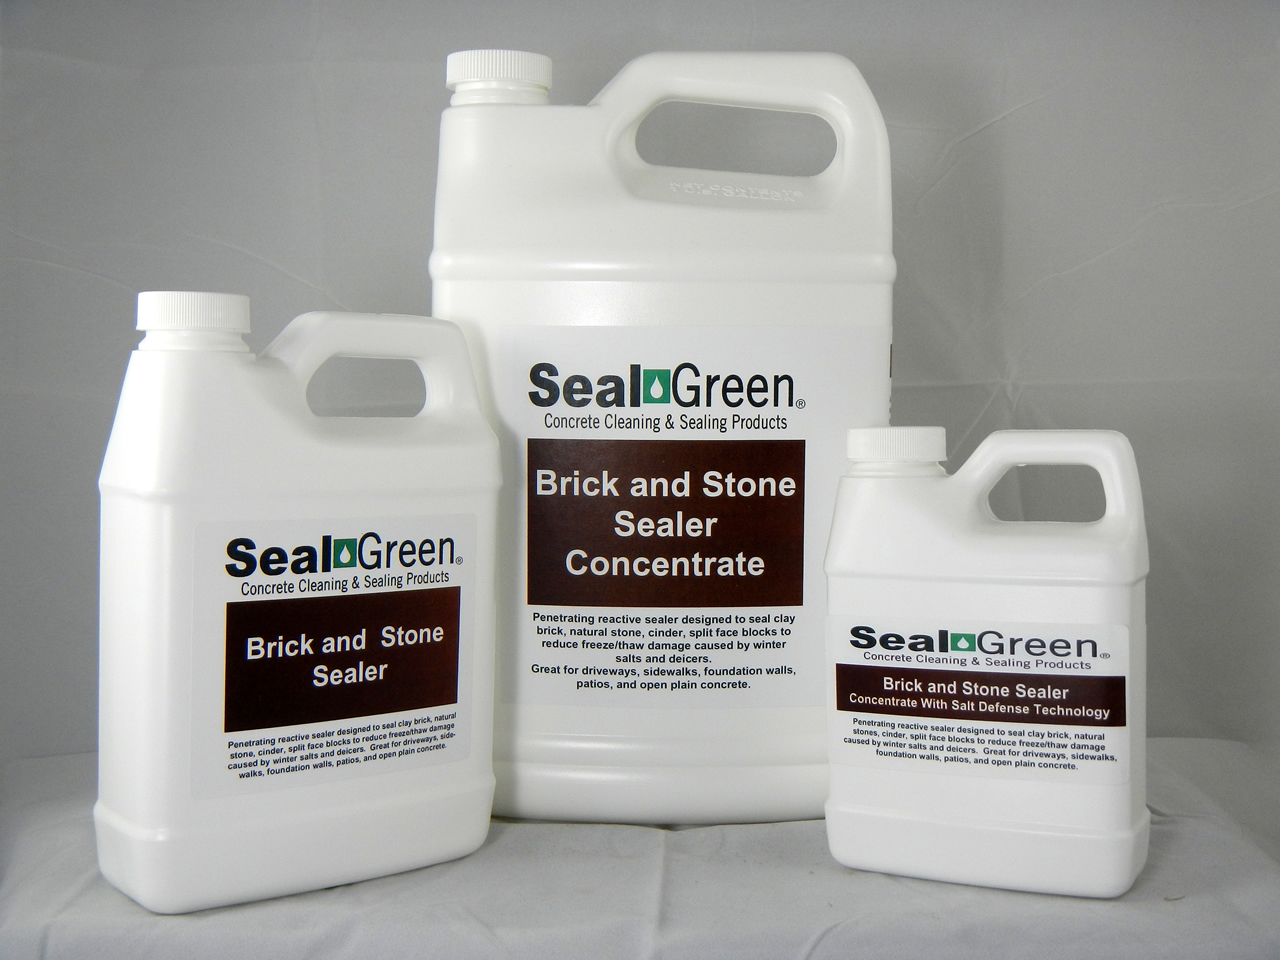 Three questions for you: 1) Do you ship Seal Green Brick and Stone Sealant to California; 2) Is this a penetrating